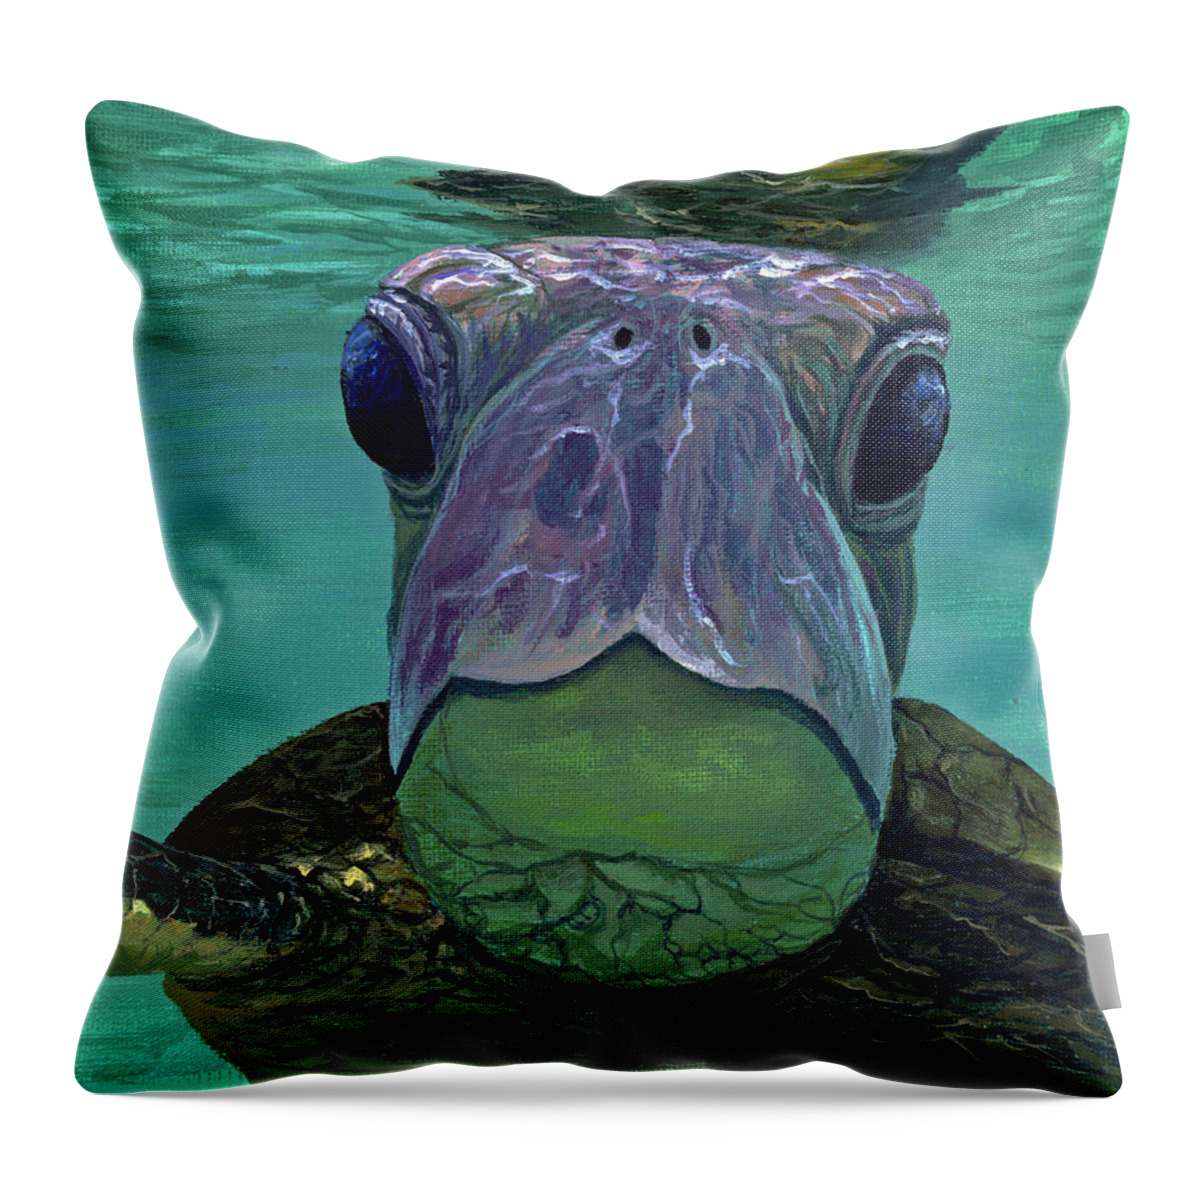 Animal Throw Pillow featuring the painting Who Me? by Darice Machel McGuire